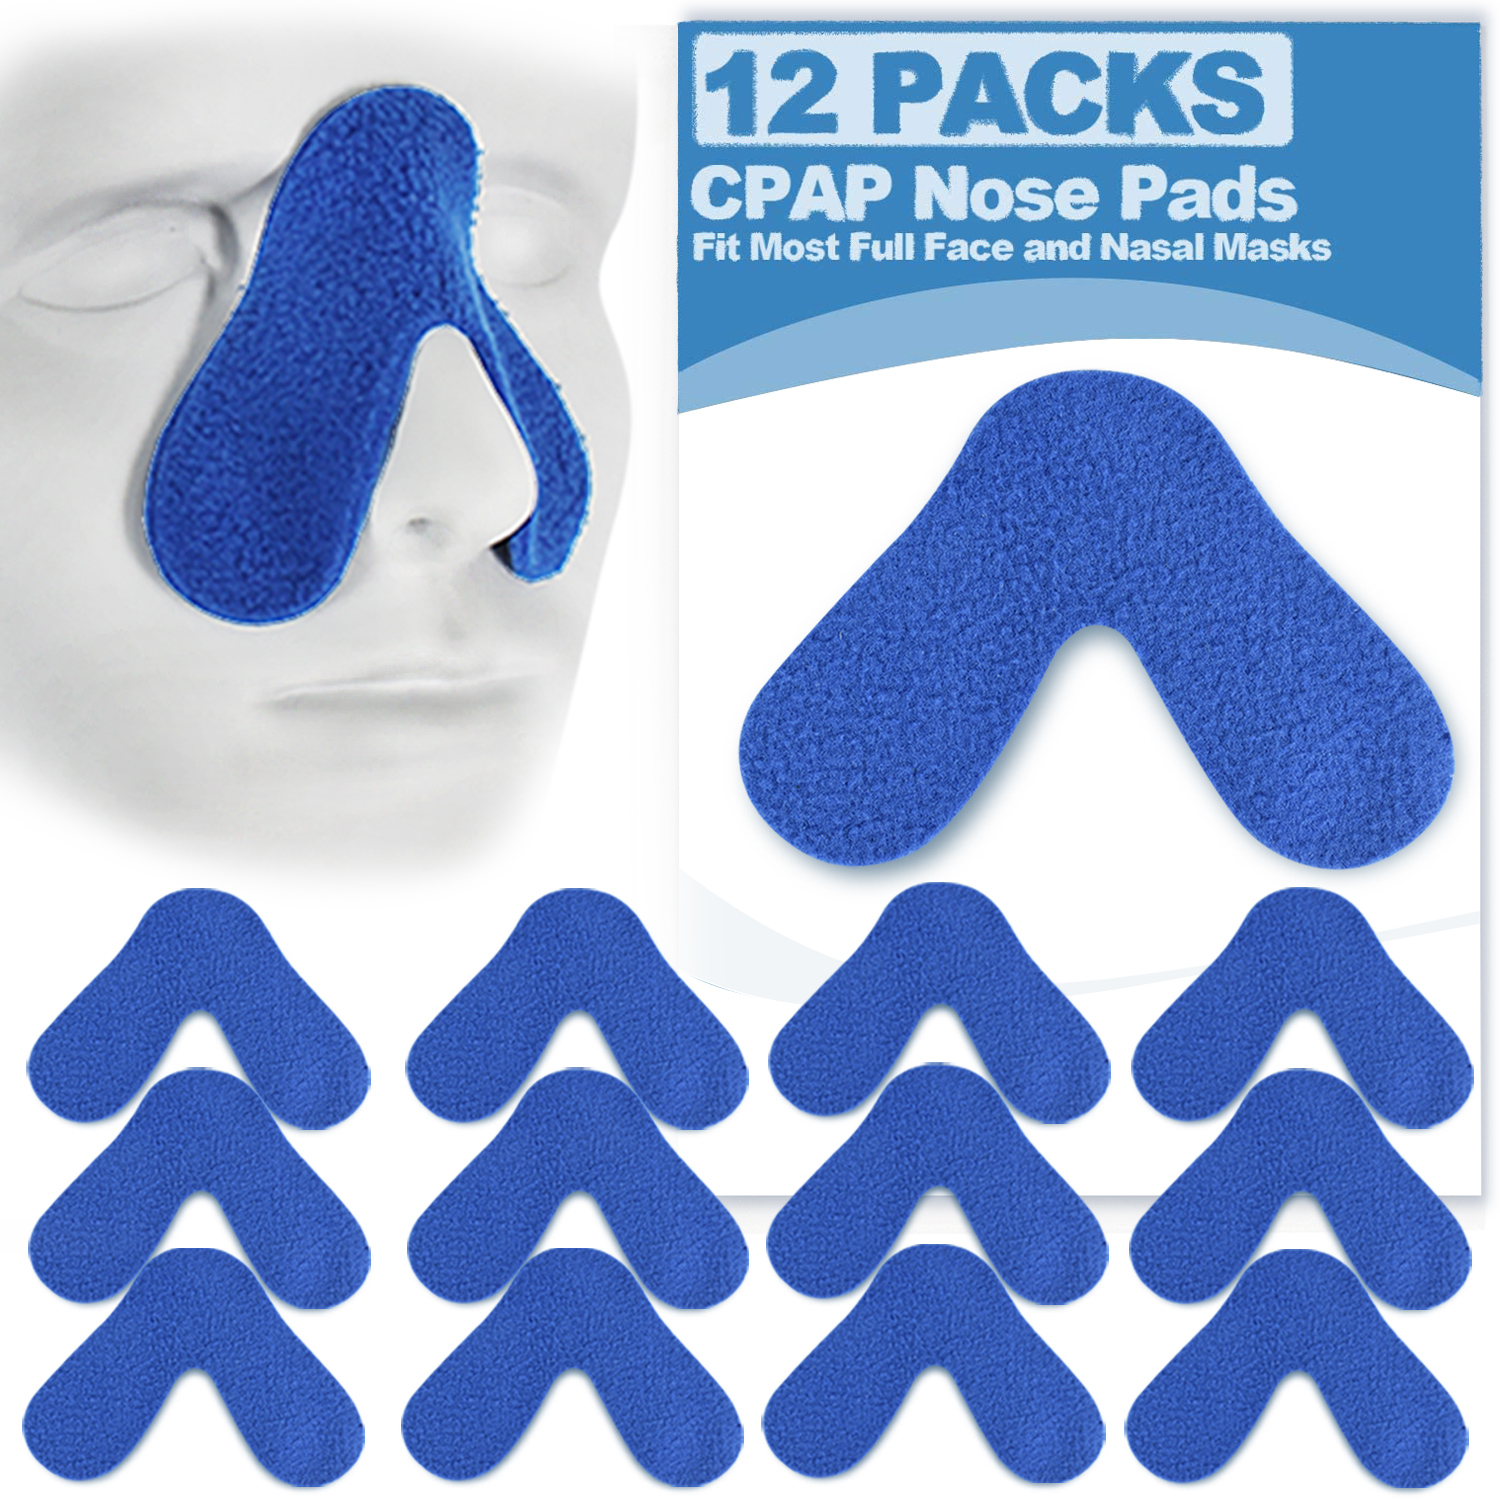 10 Pack Nasal Pads for CPAP Mask - CPAP Nose Pads - CPAP Supplies for CPAP  Machine - Sleep Apnea Mask Comfort Pad - Custom Design & Can Be Trimmed to